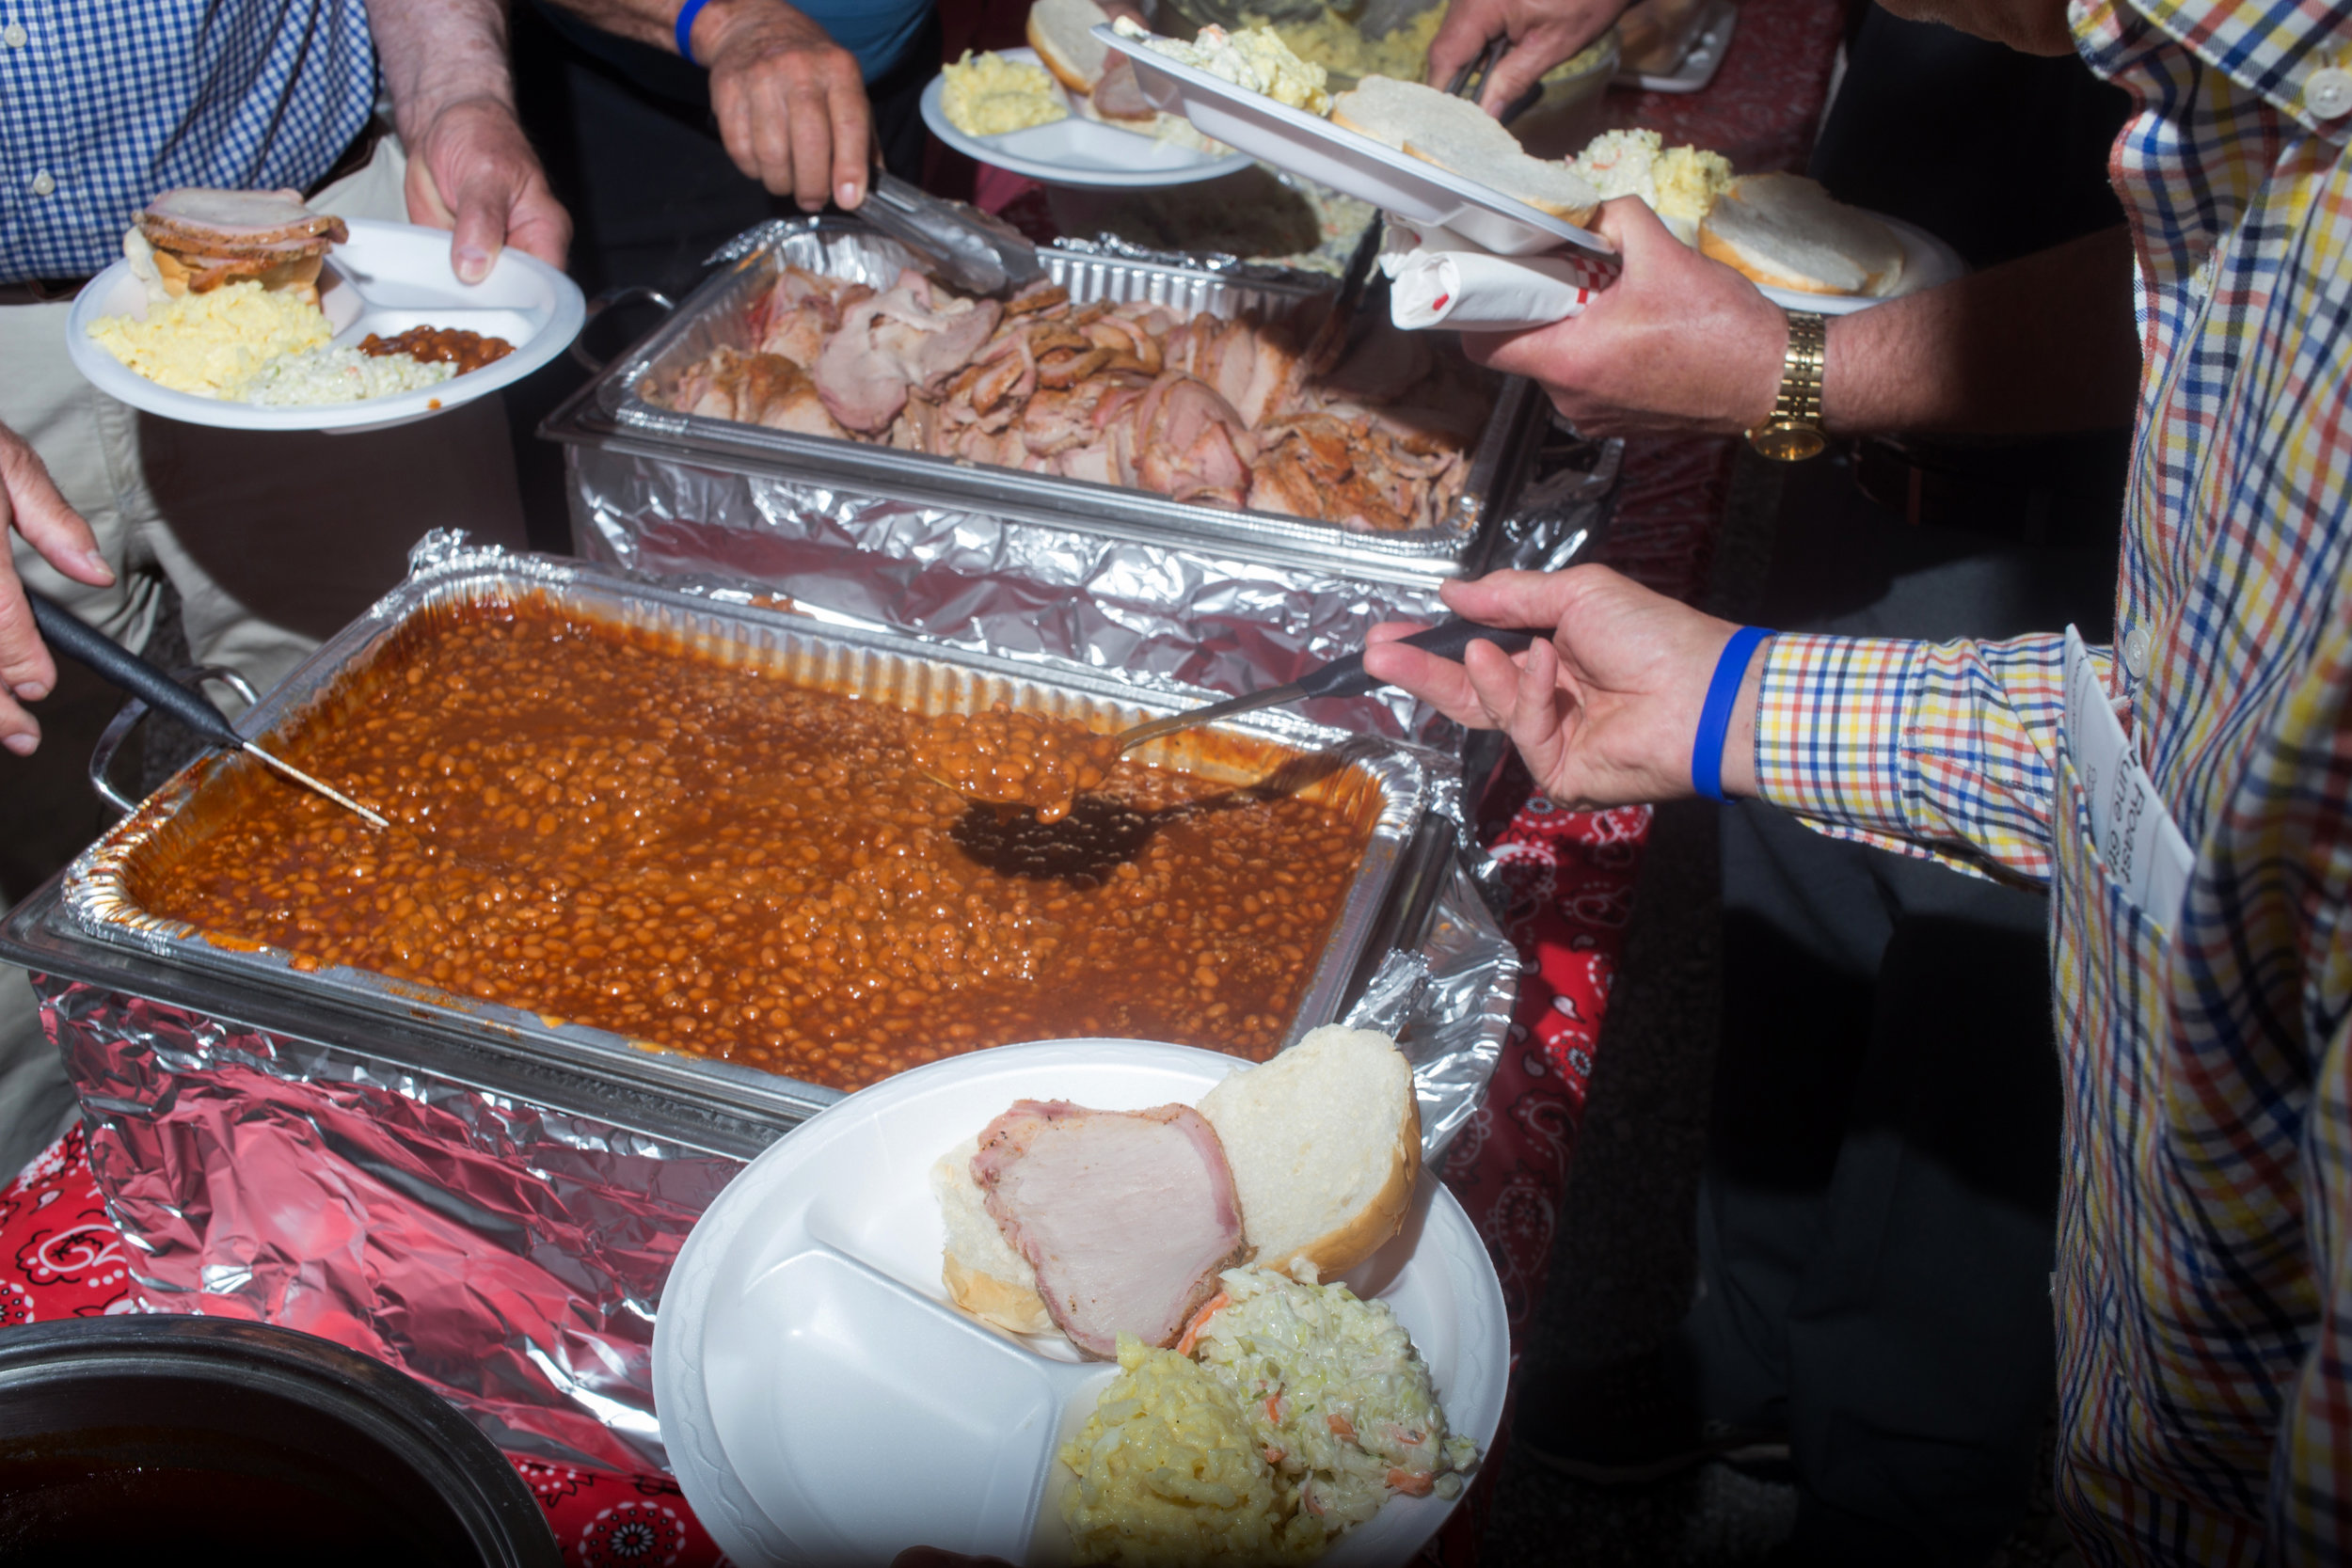  Attendees pile food on their plates at Senator Joni Ernst's First Annual Roast &amp; Ride on June 6, 2015 in Boone, Iowa.  